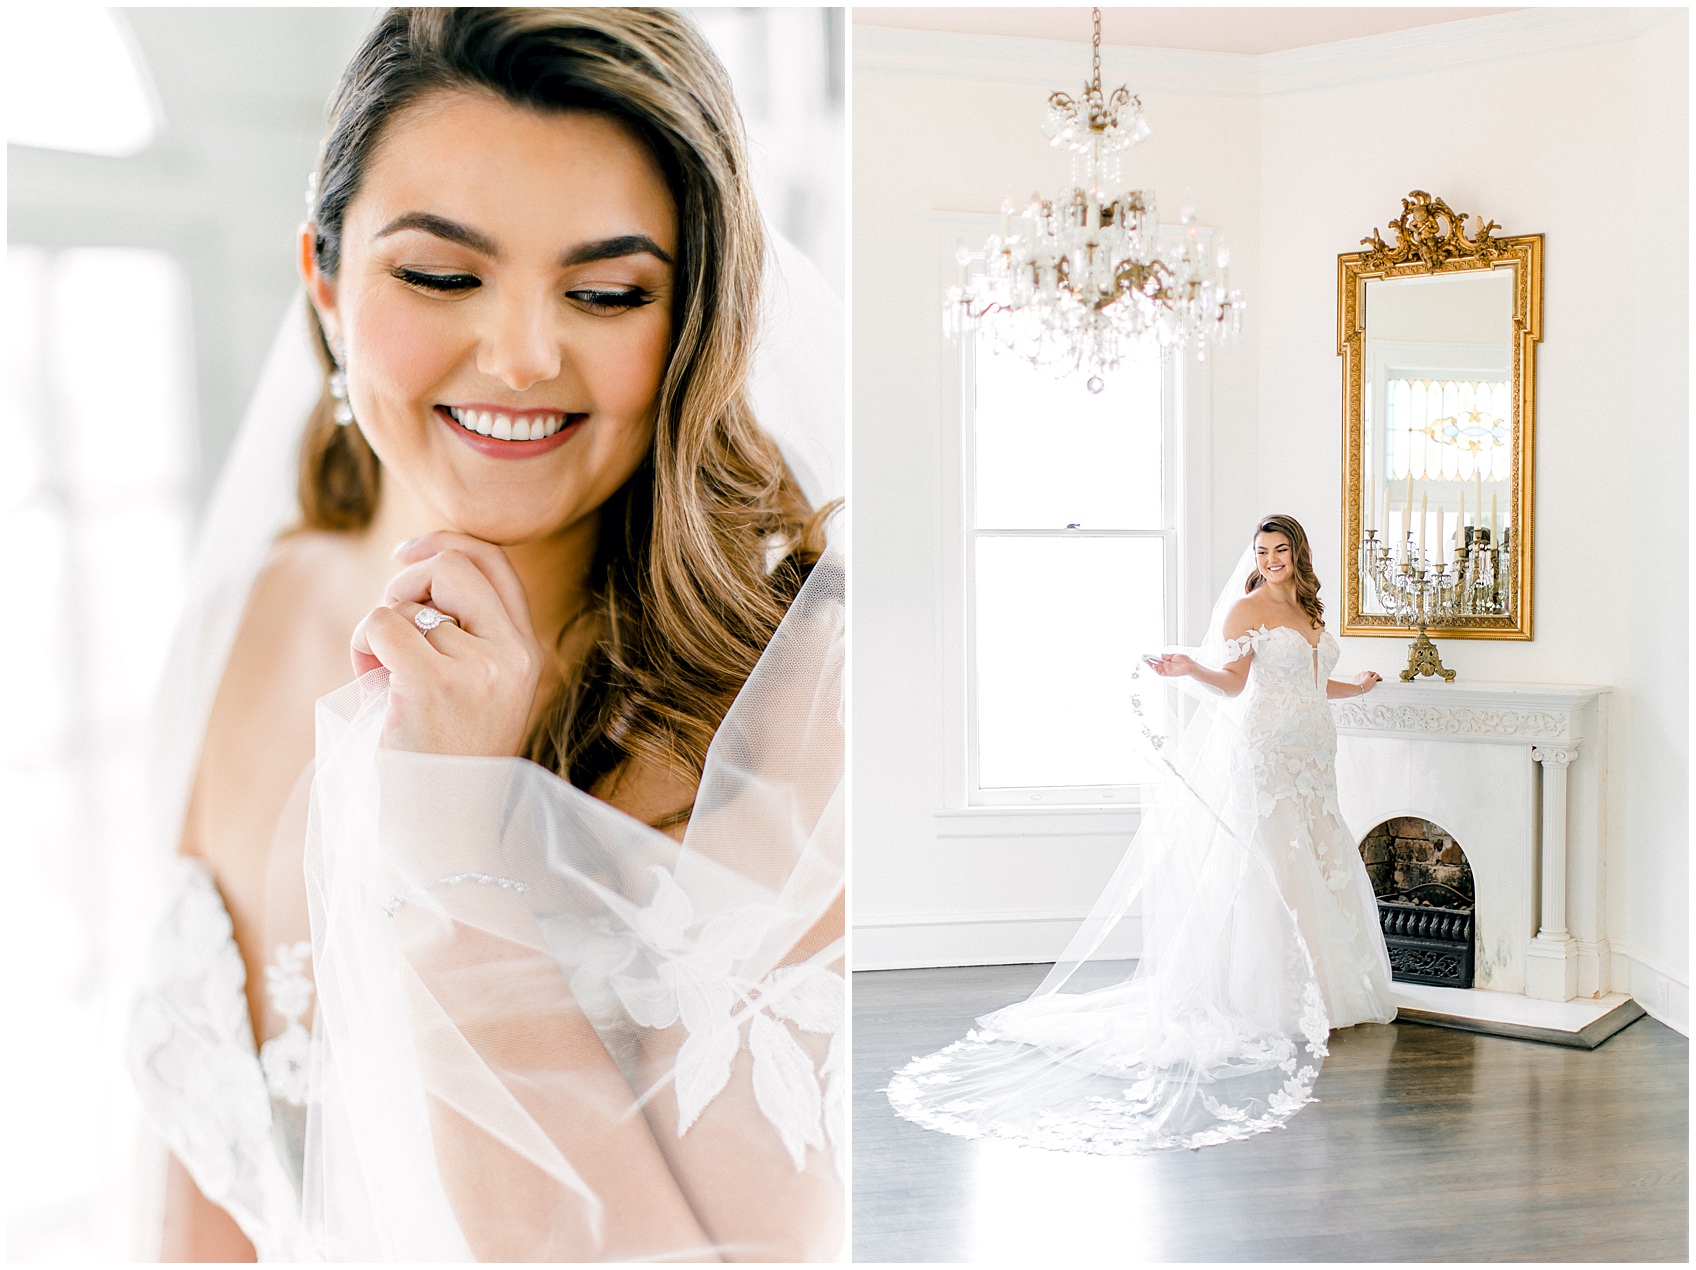 Woodbine Mansion Spring Bridal wedding Photos by Allison Jeffers Photography 0004